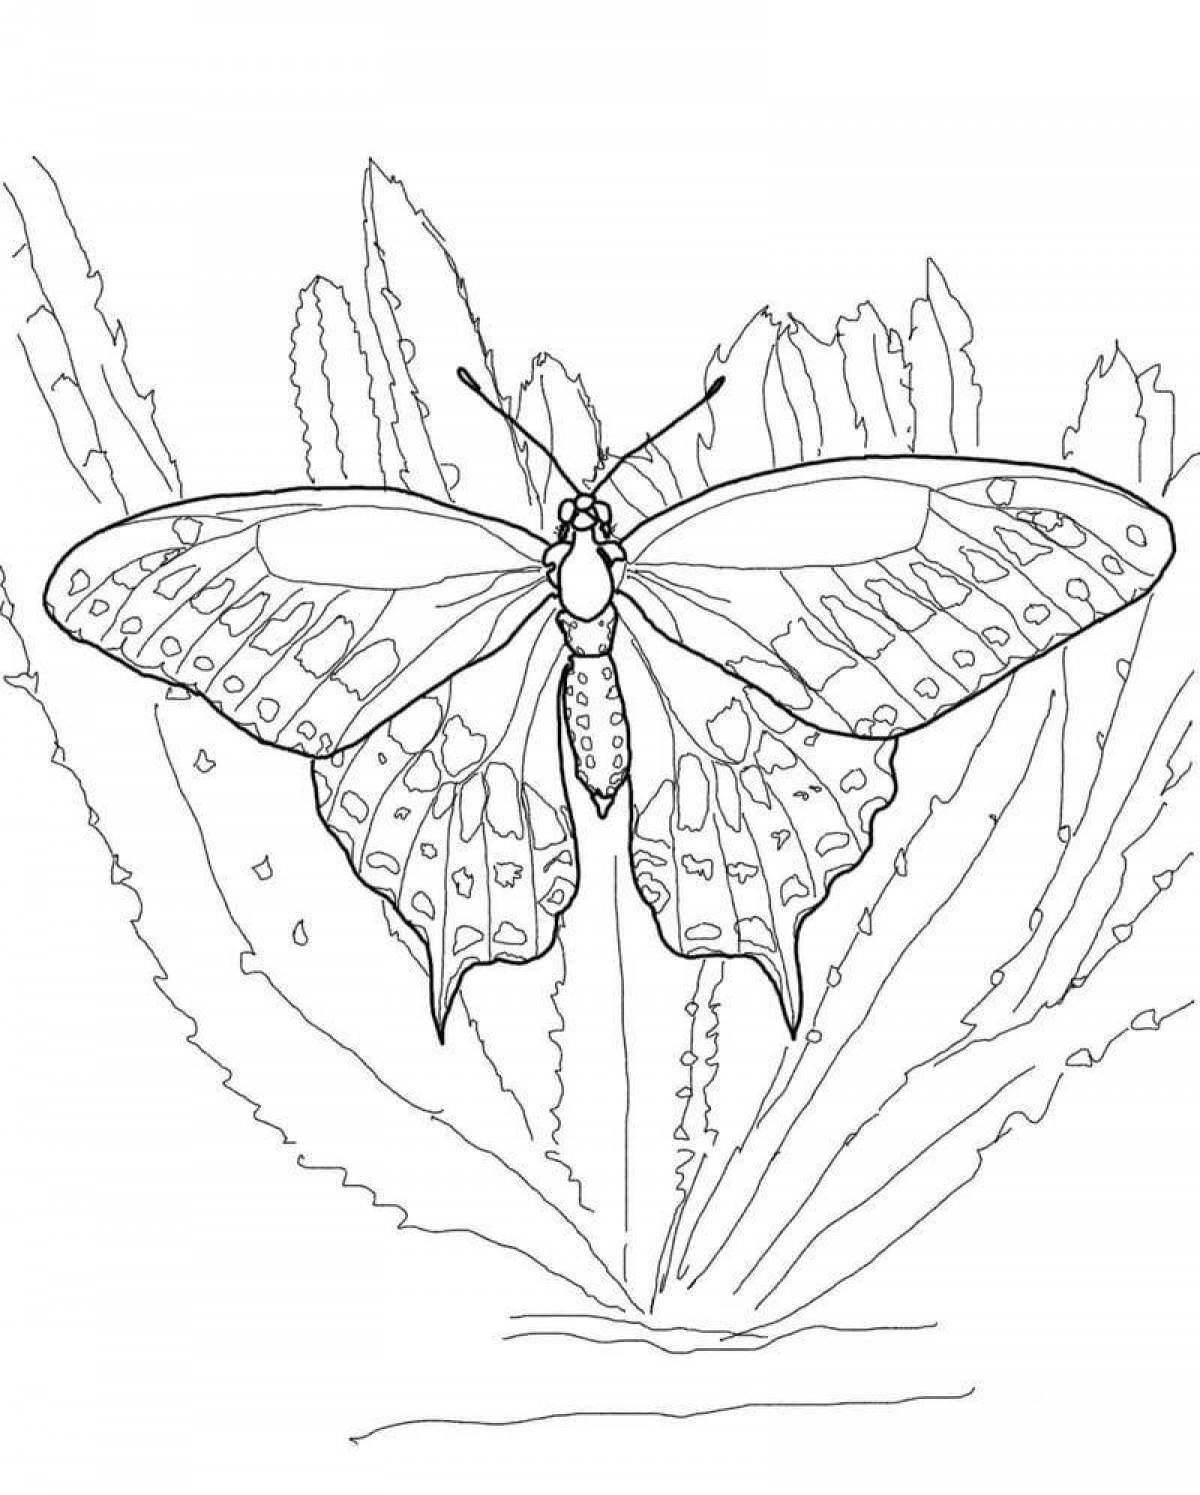 Coloring book shining swallowtail butterfly